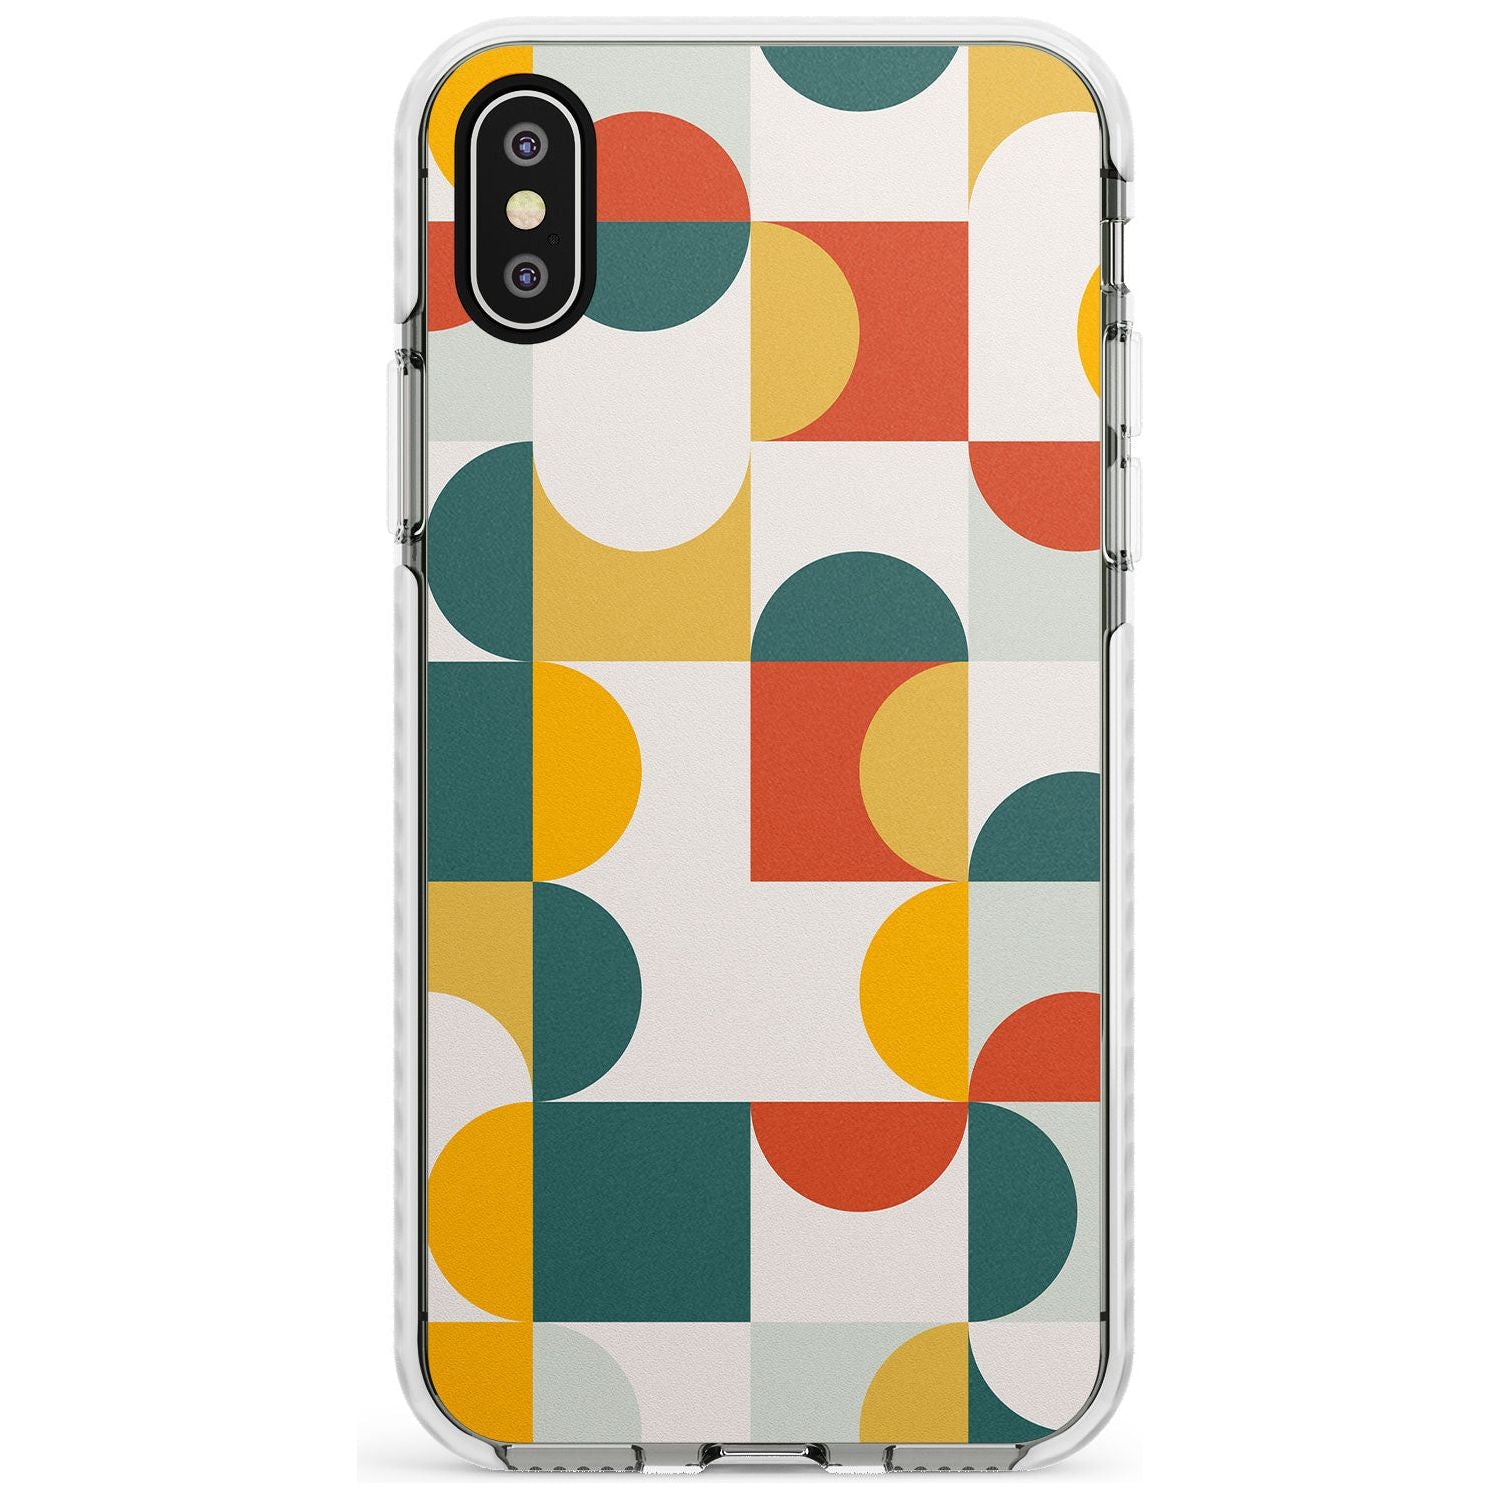 Abstract Retro Shapes: Muted Colour Mix Slim TPU Phone Case Warehouse X XS Max XR